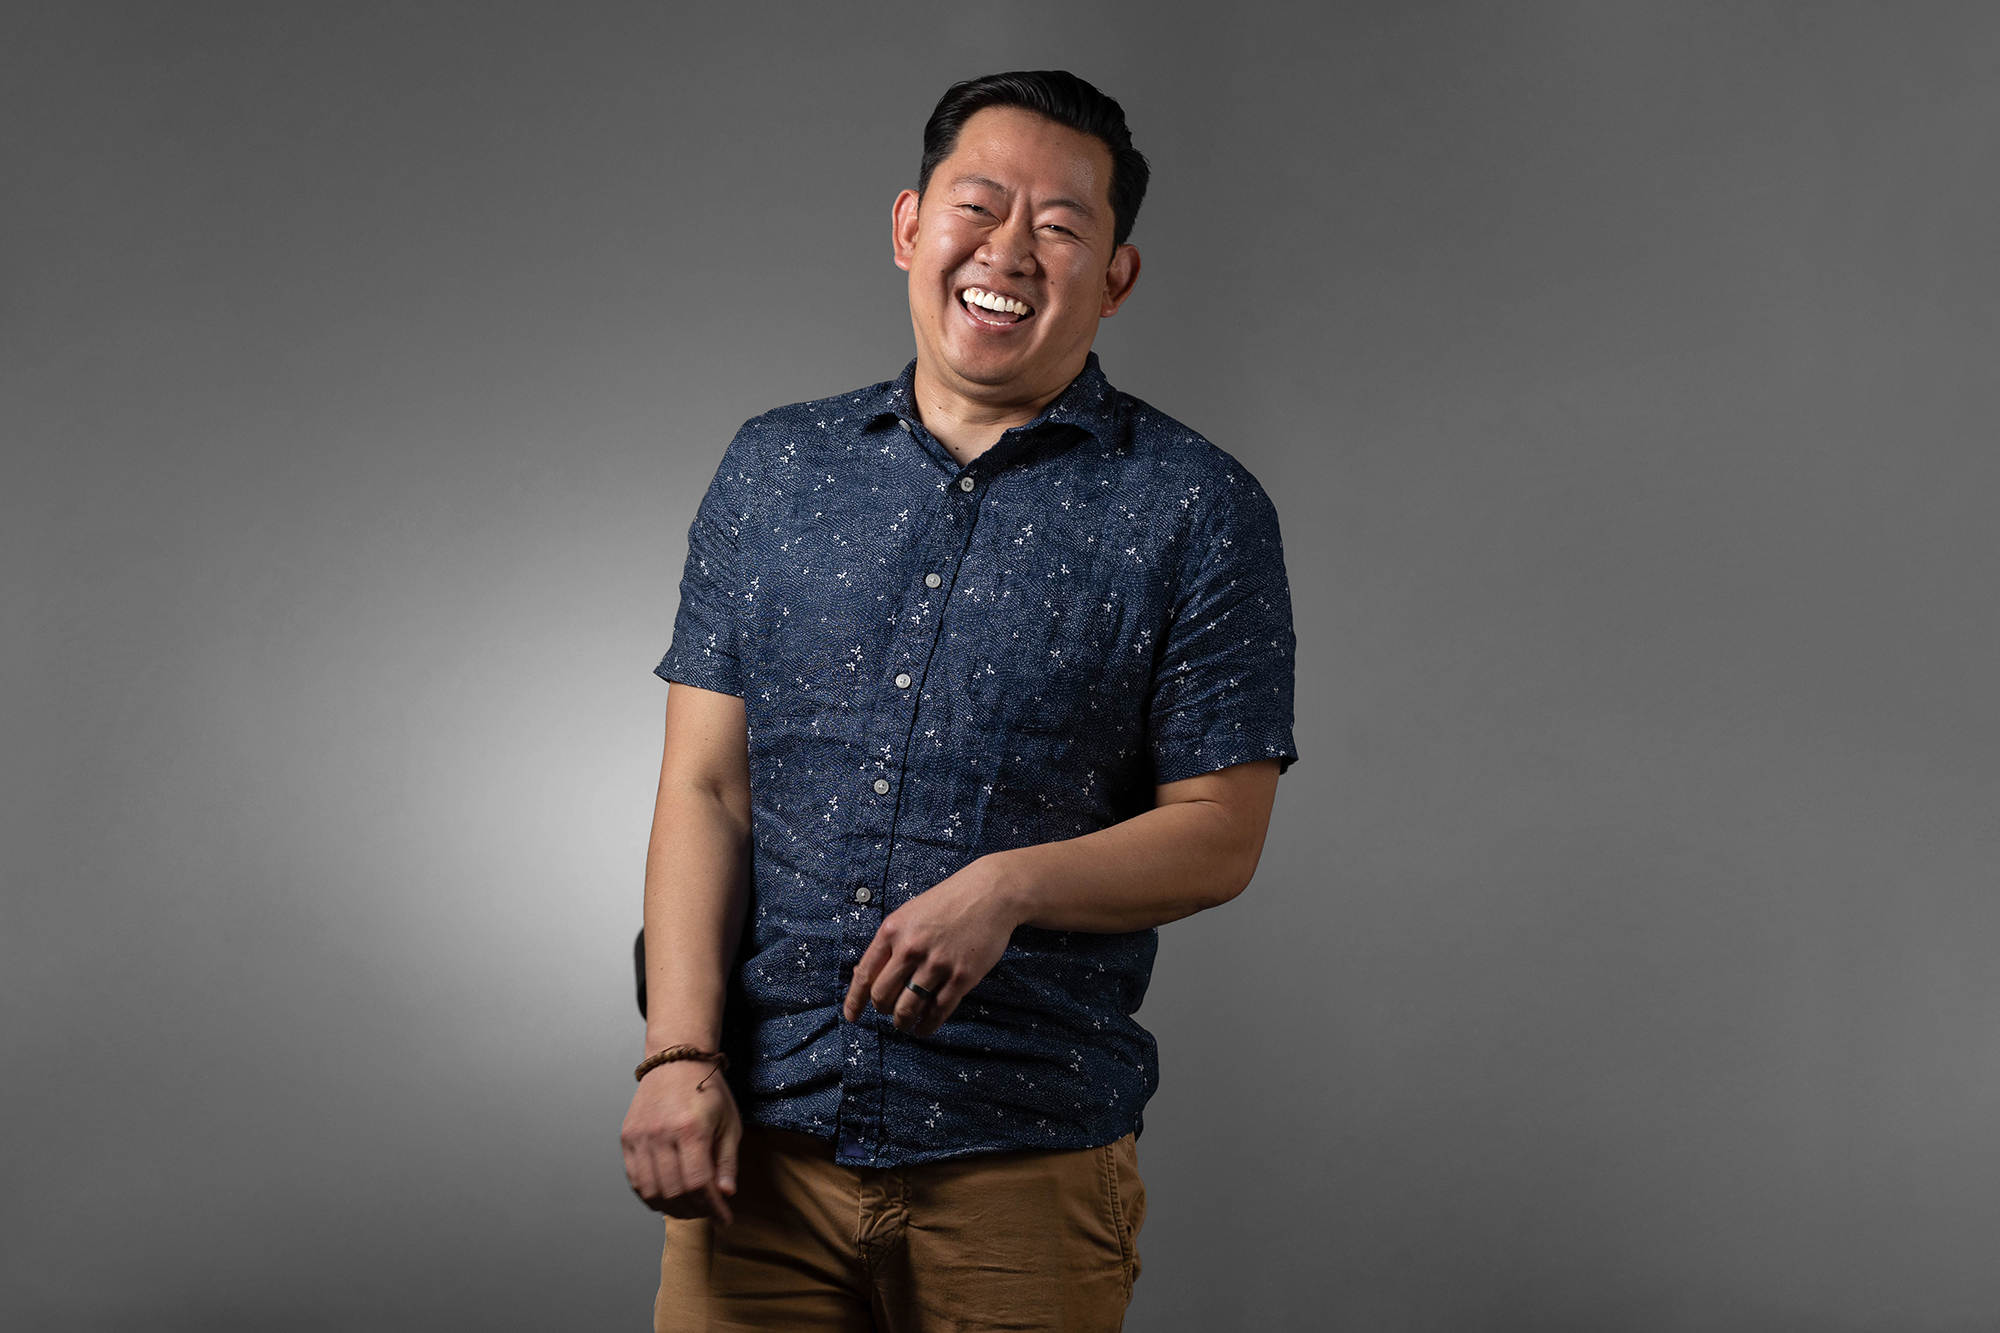         Description: A smiling man wearing a blue shirt and tan pants for corporate headshots.